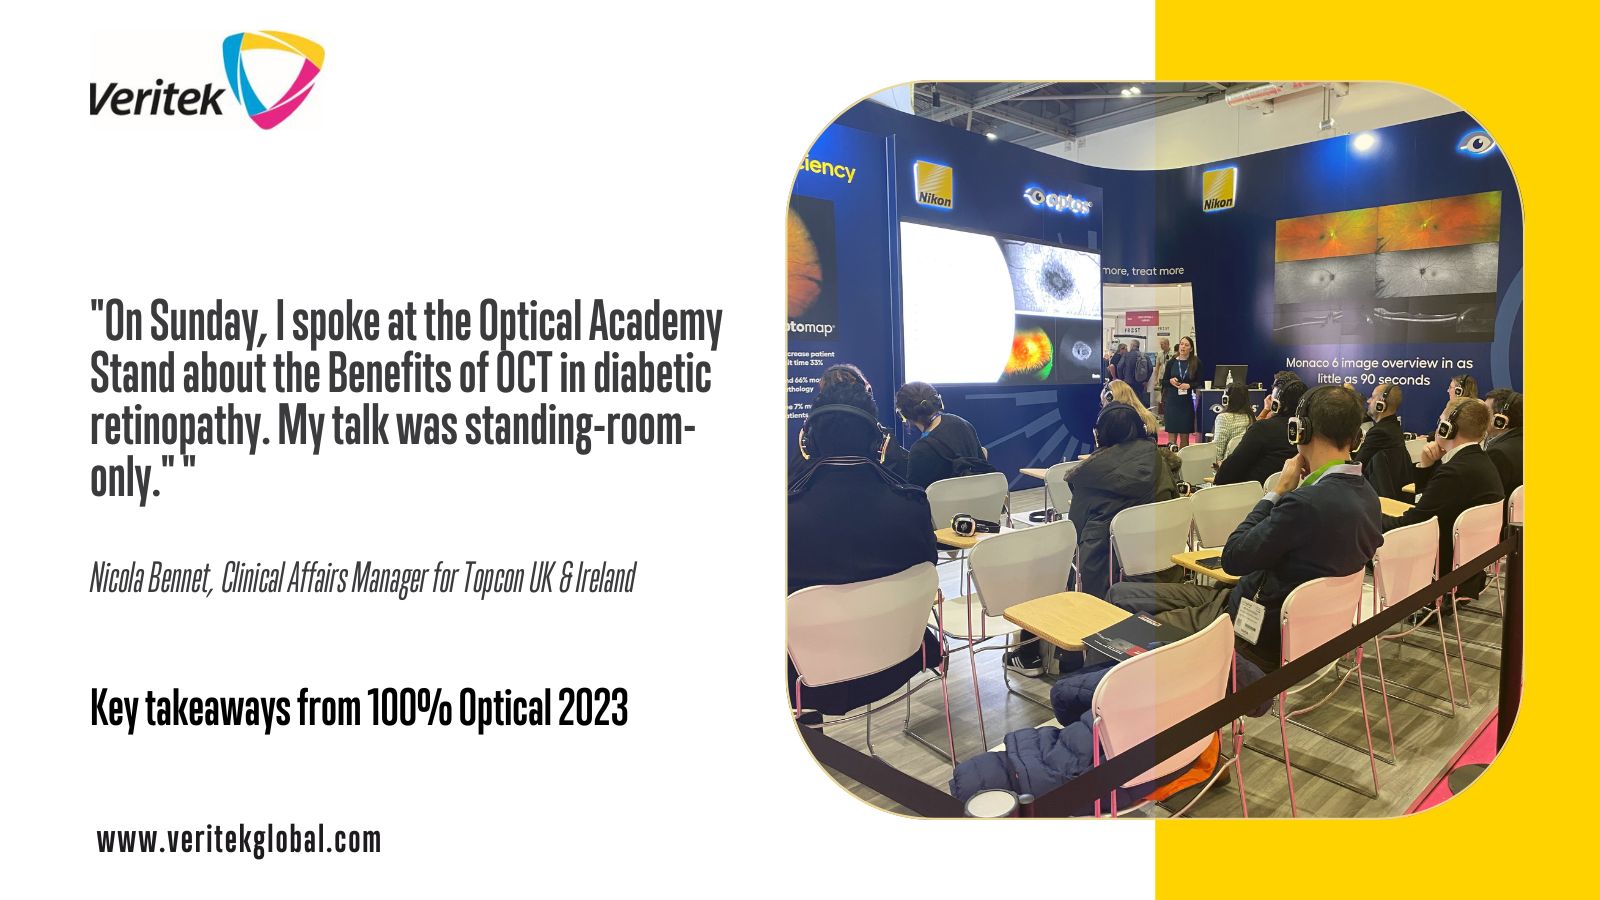 "On Sunday, I spoke at the Optical Academy Stand about the Benefits of OCT in diabetic retinopathy. My talk was standing-room-only." Nicola Bennet, Clinical Affairs Manager for Topcon UK & Ireland | 100% Optical 2023 recap | Veritek